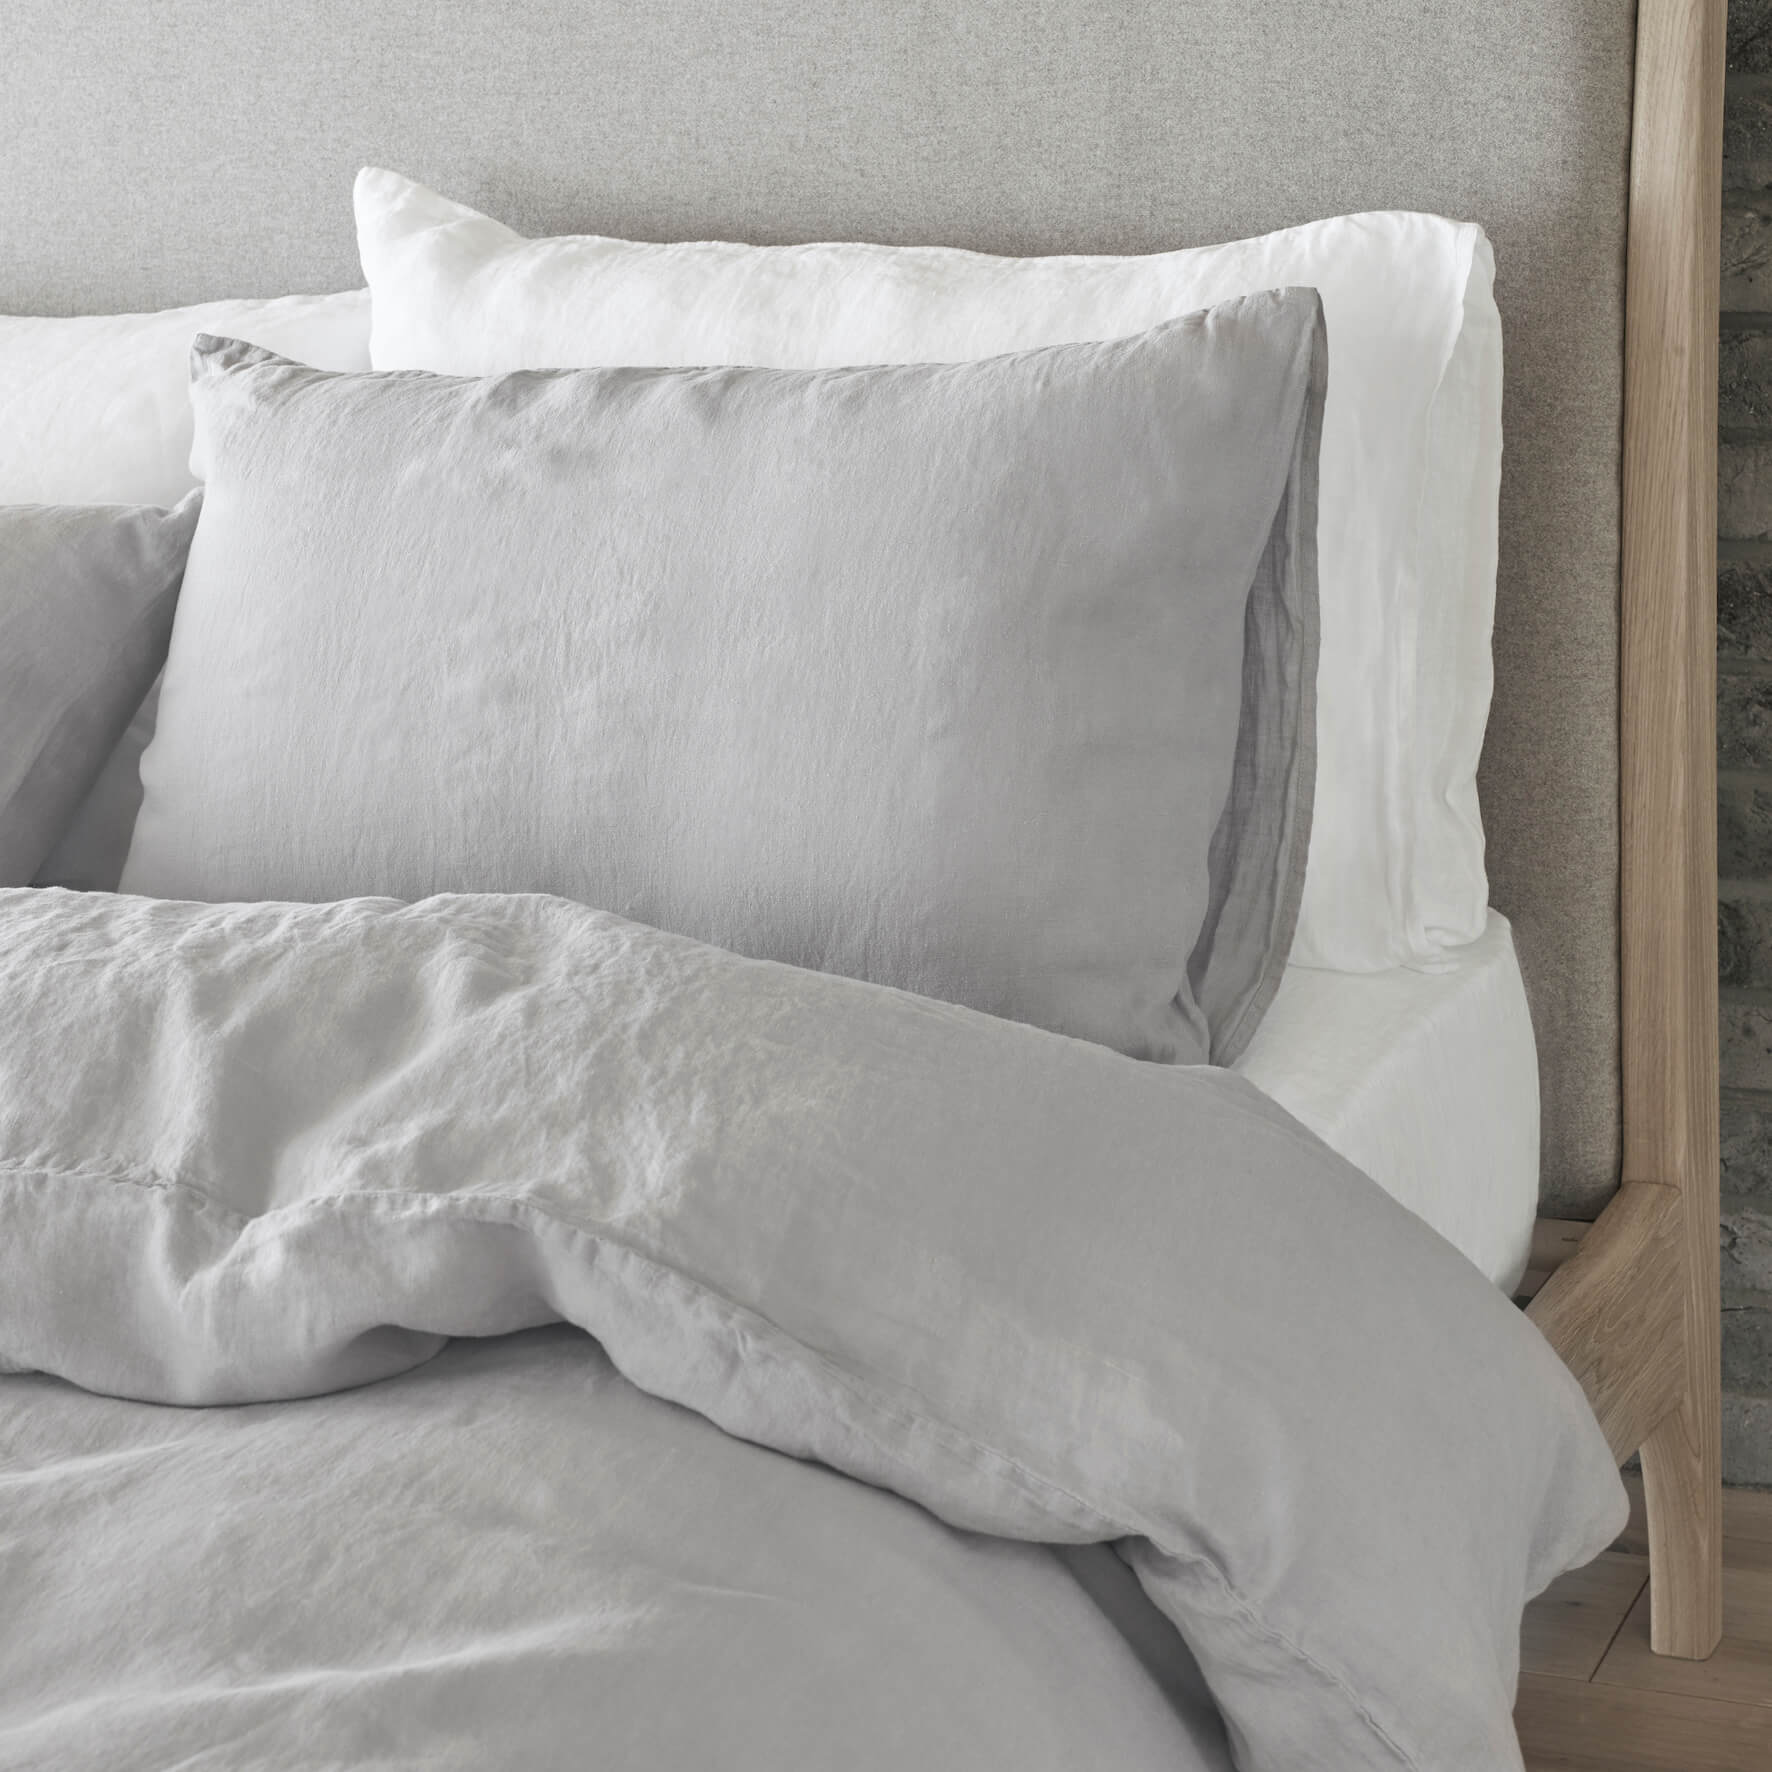 Take your bed from boring to beautiful with my bedroom! Learn how to dress your bed like a pro with 5 expert tips from interior stylist Maxine Brady.